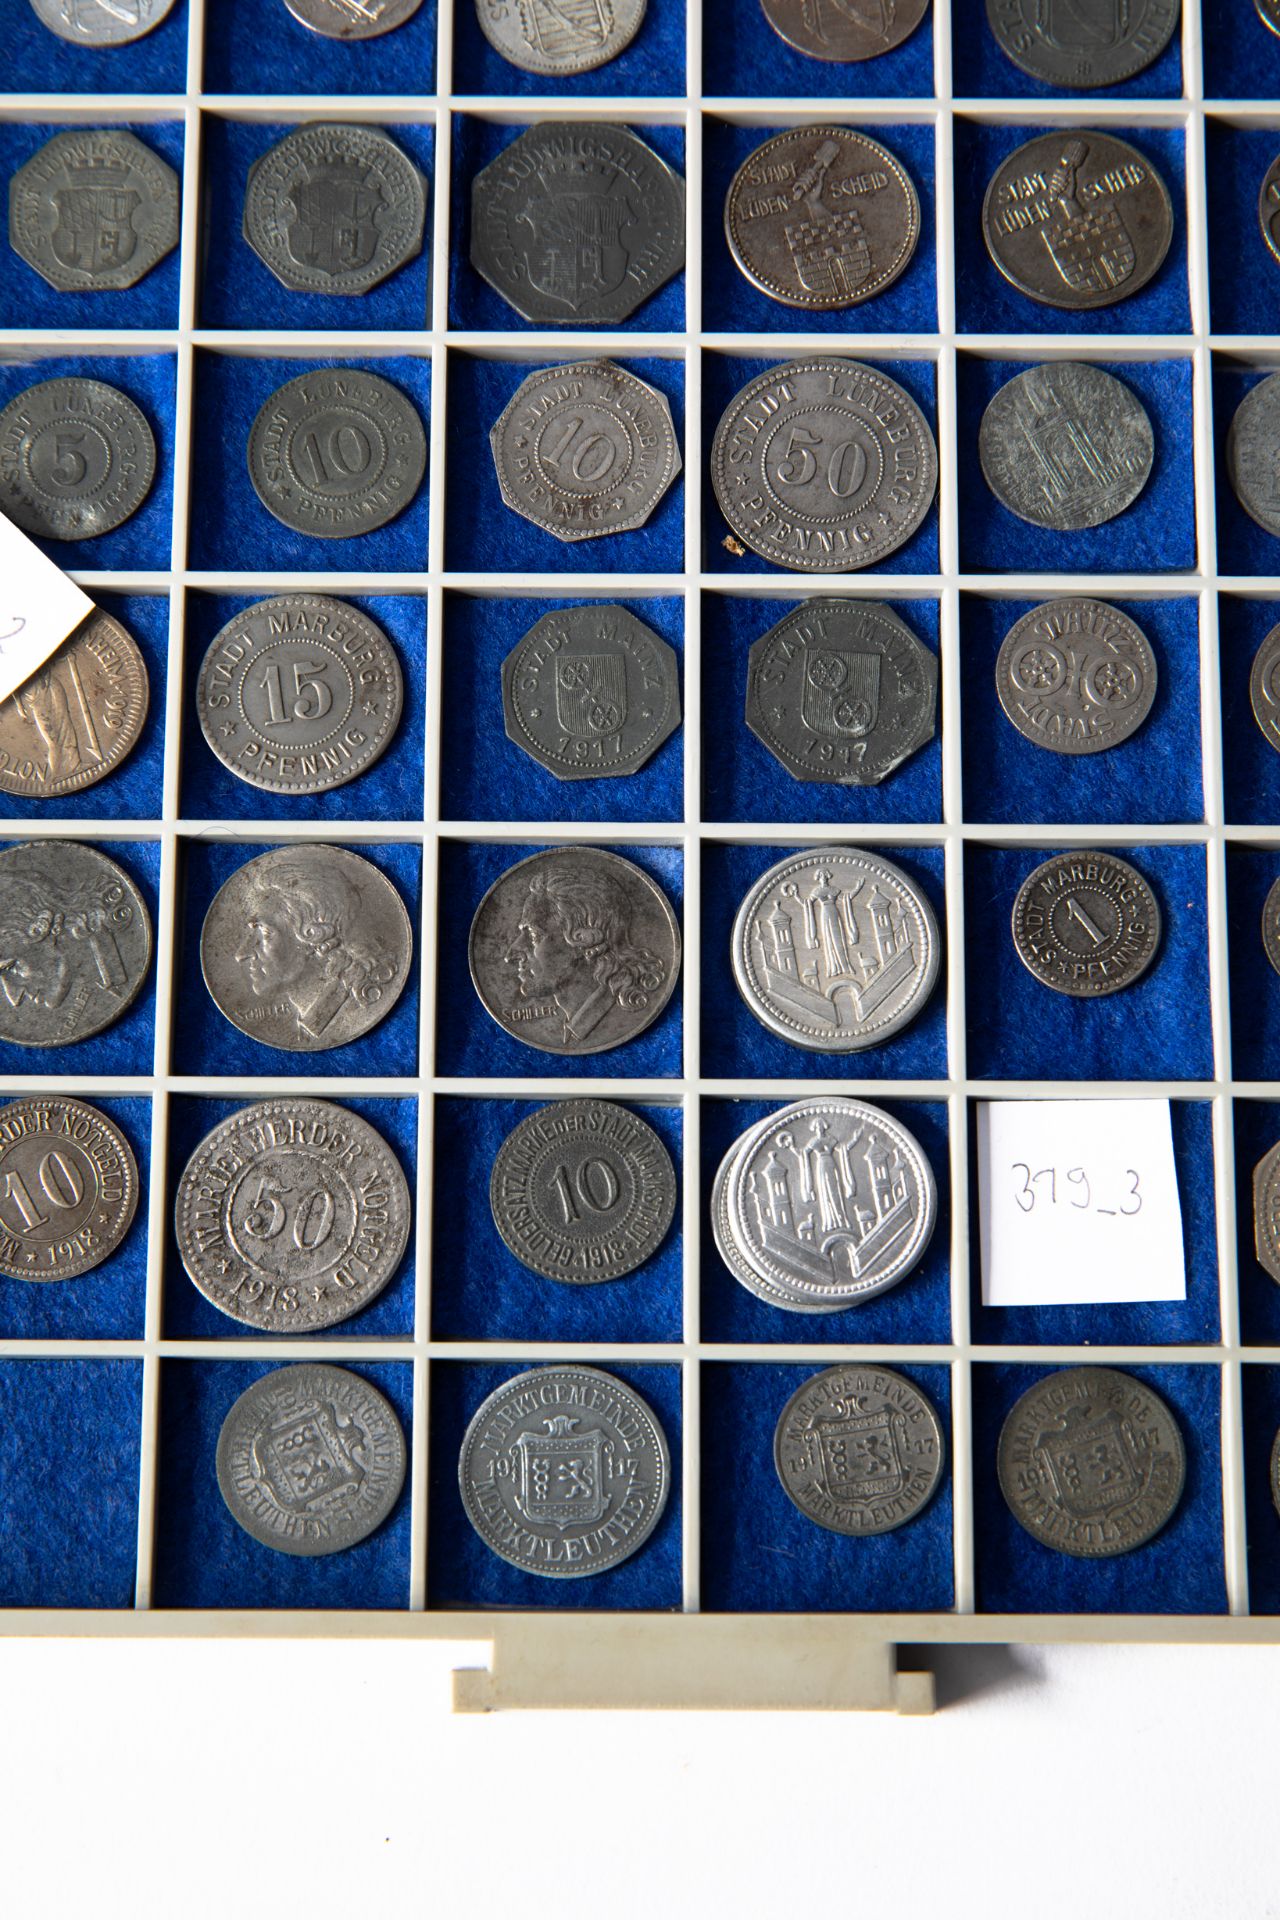 Emergency coins Germany cities from L-M, 265 pieces - Bild 4 aus 22